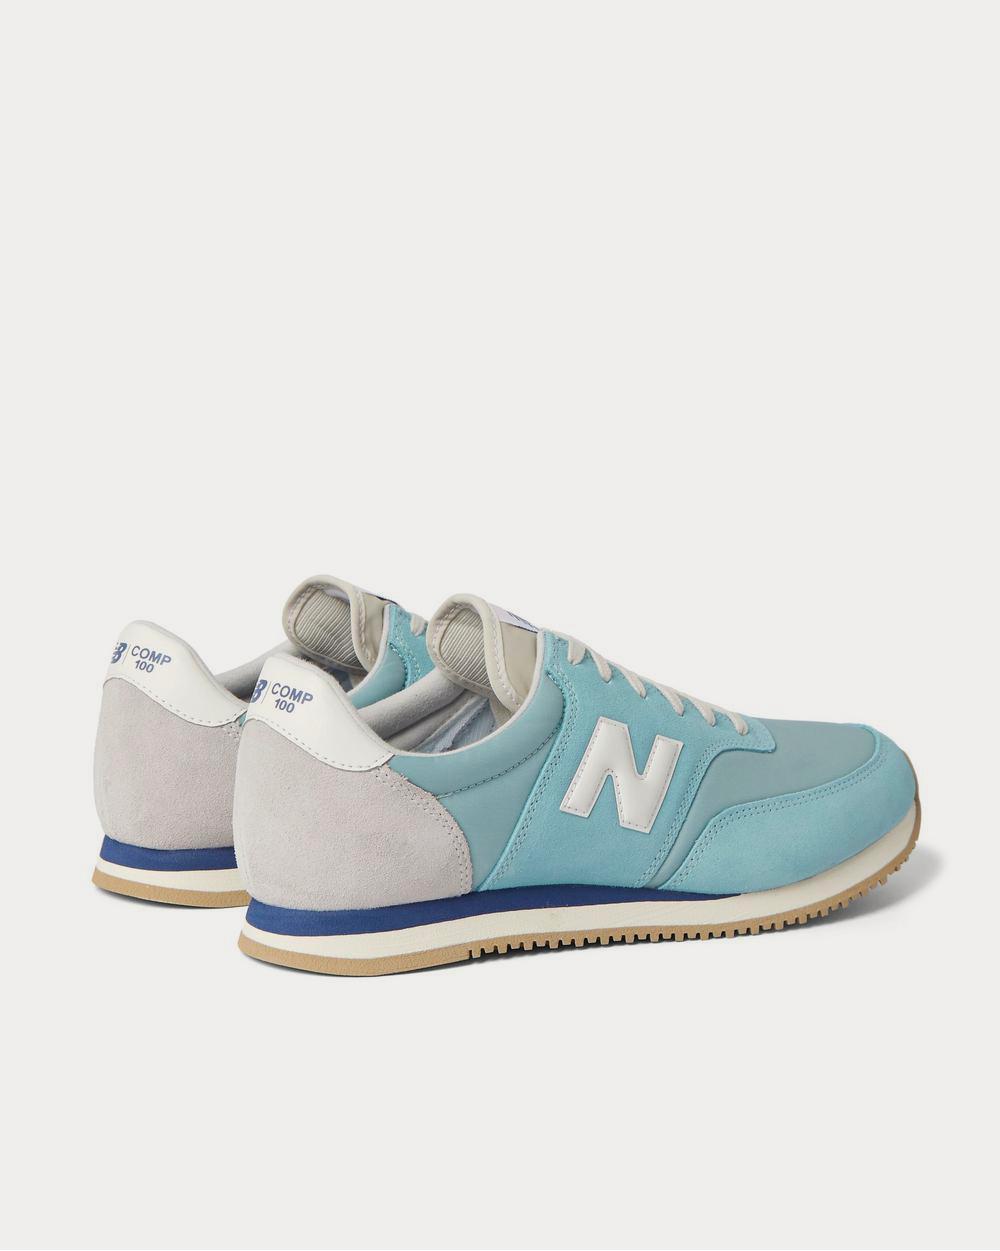 New Balance - Comp 100 Leather and Suede-Trimmed Shell  Light blue low top sneakers